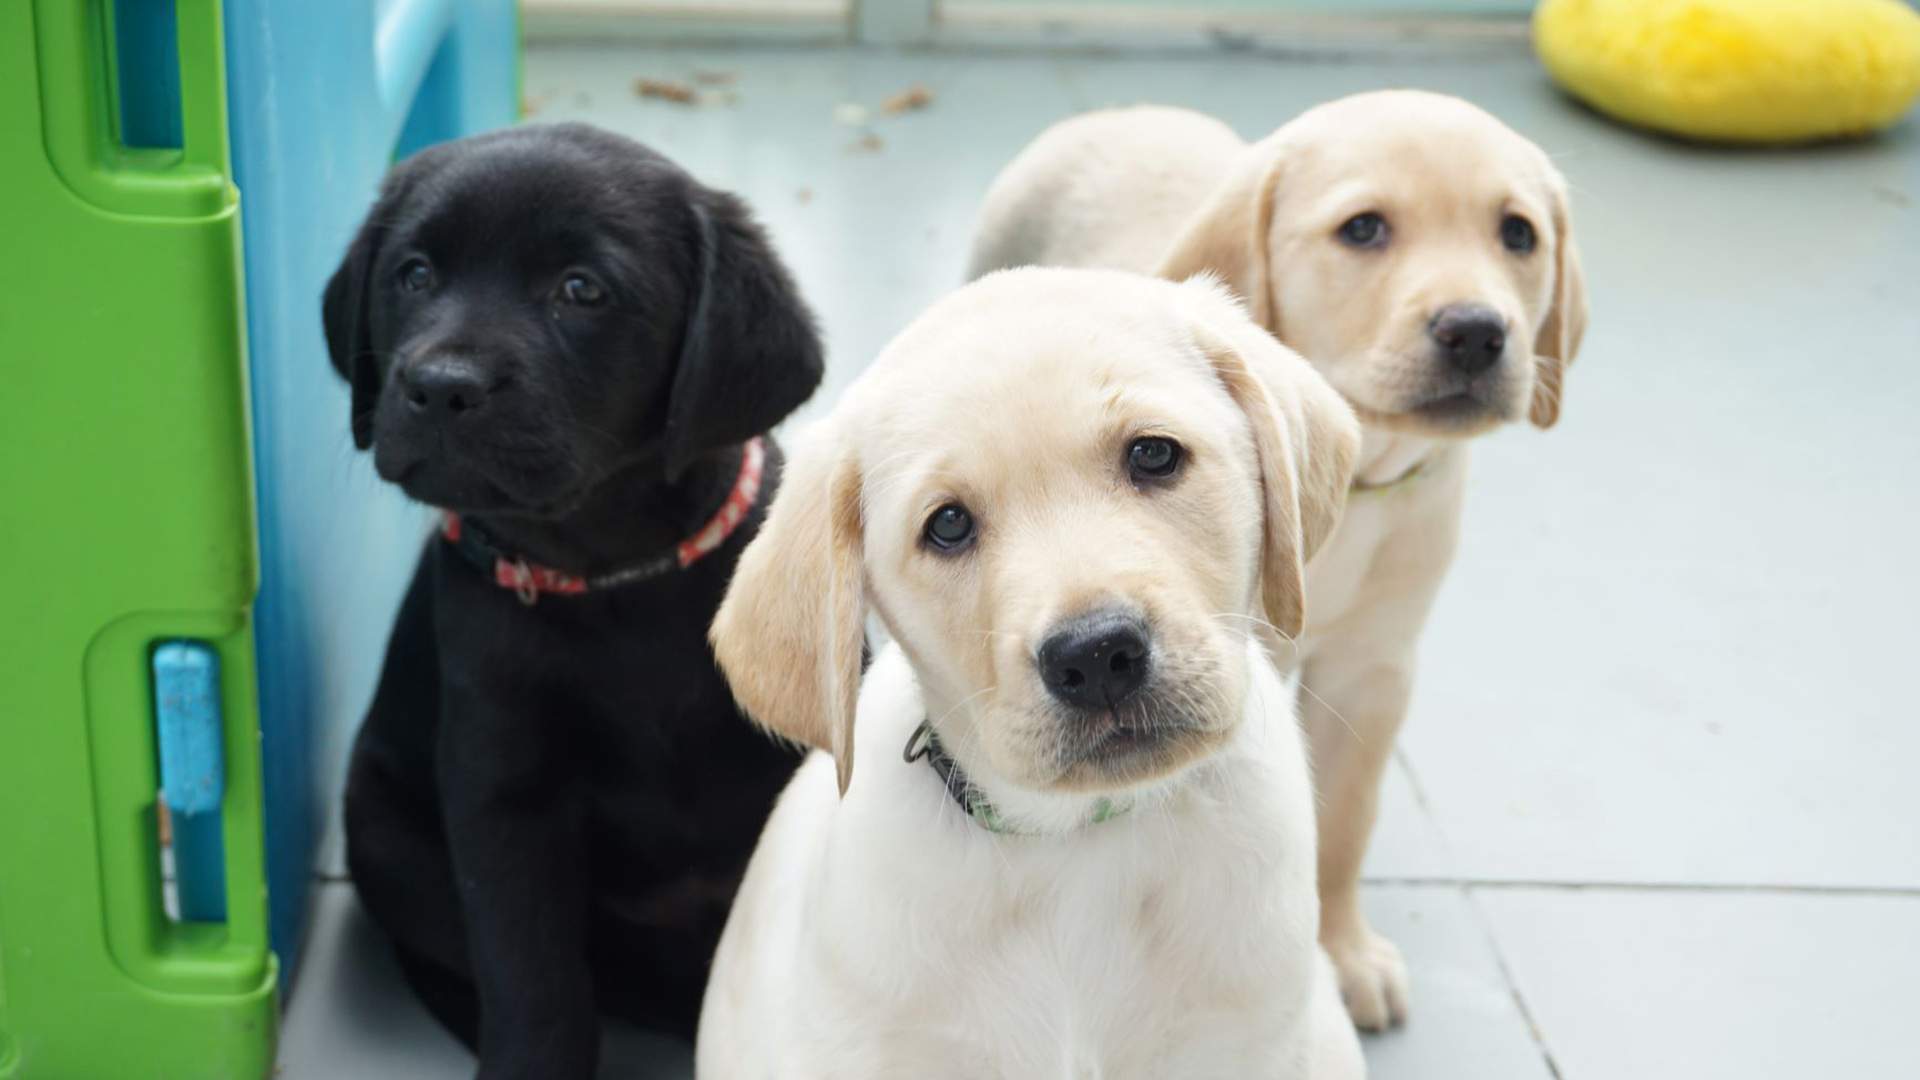 Seeing Eye Dogs Australia Needs Your Help to Look After These Adorable New Pups